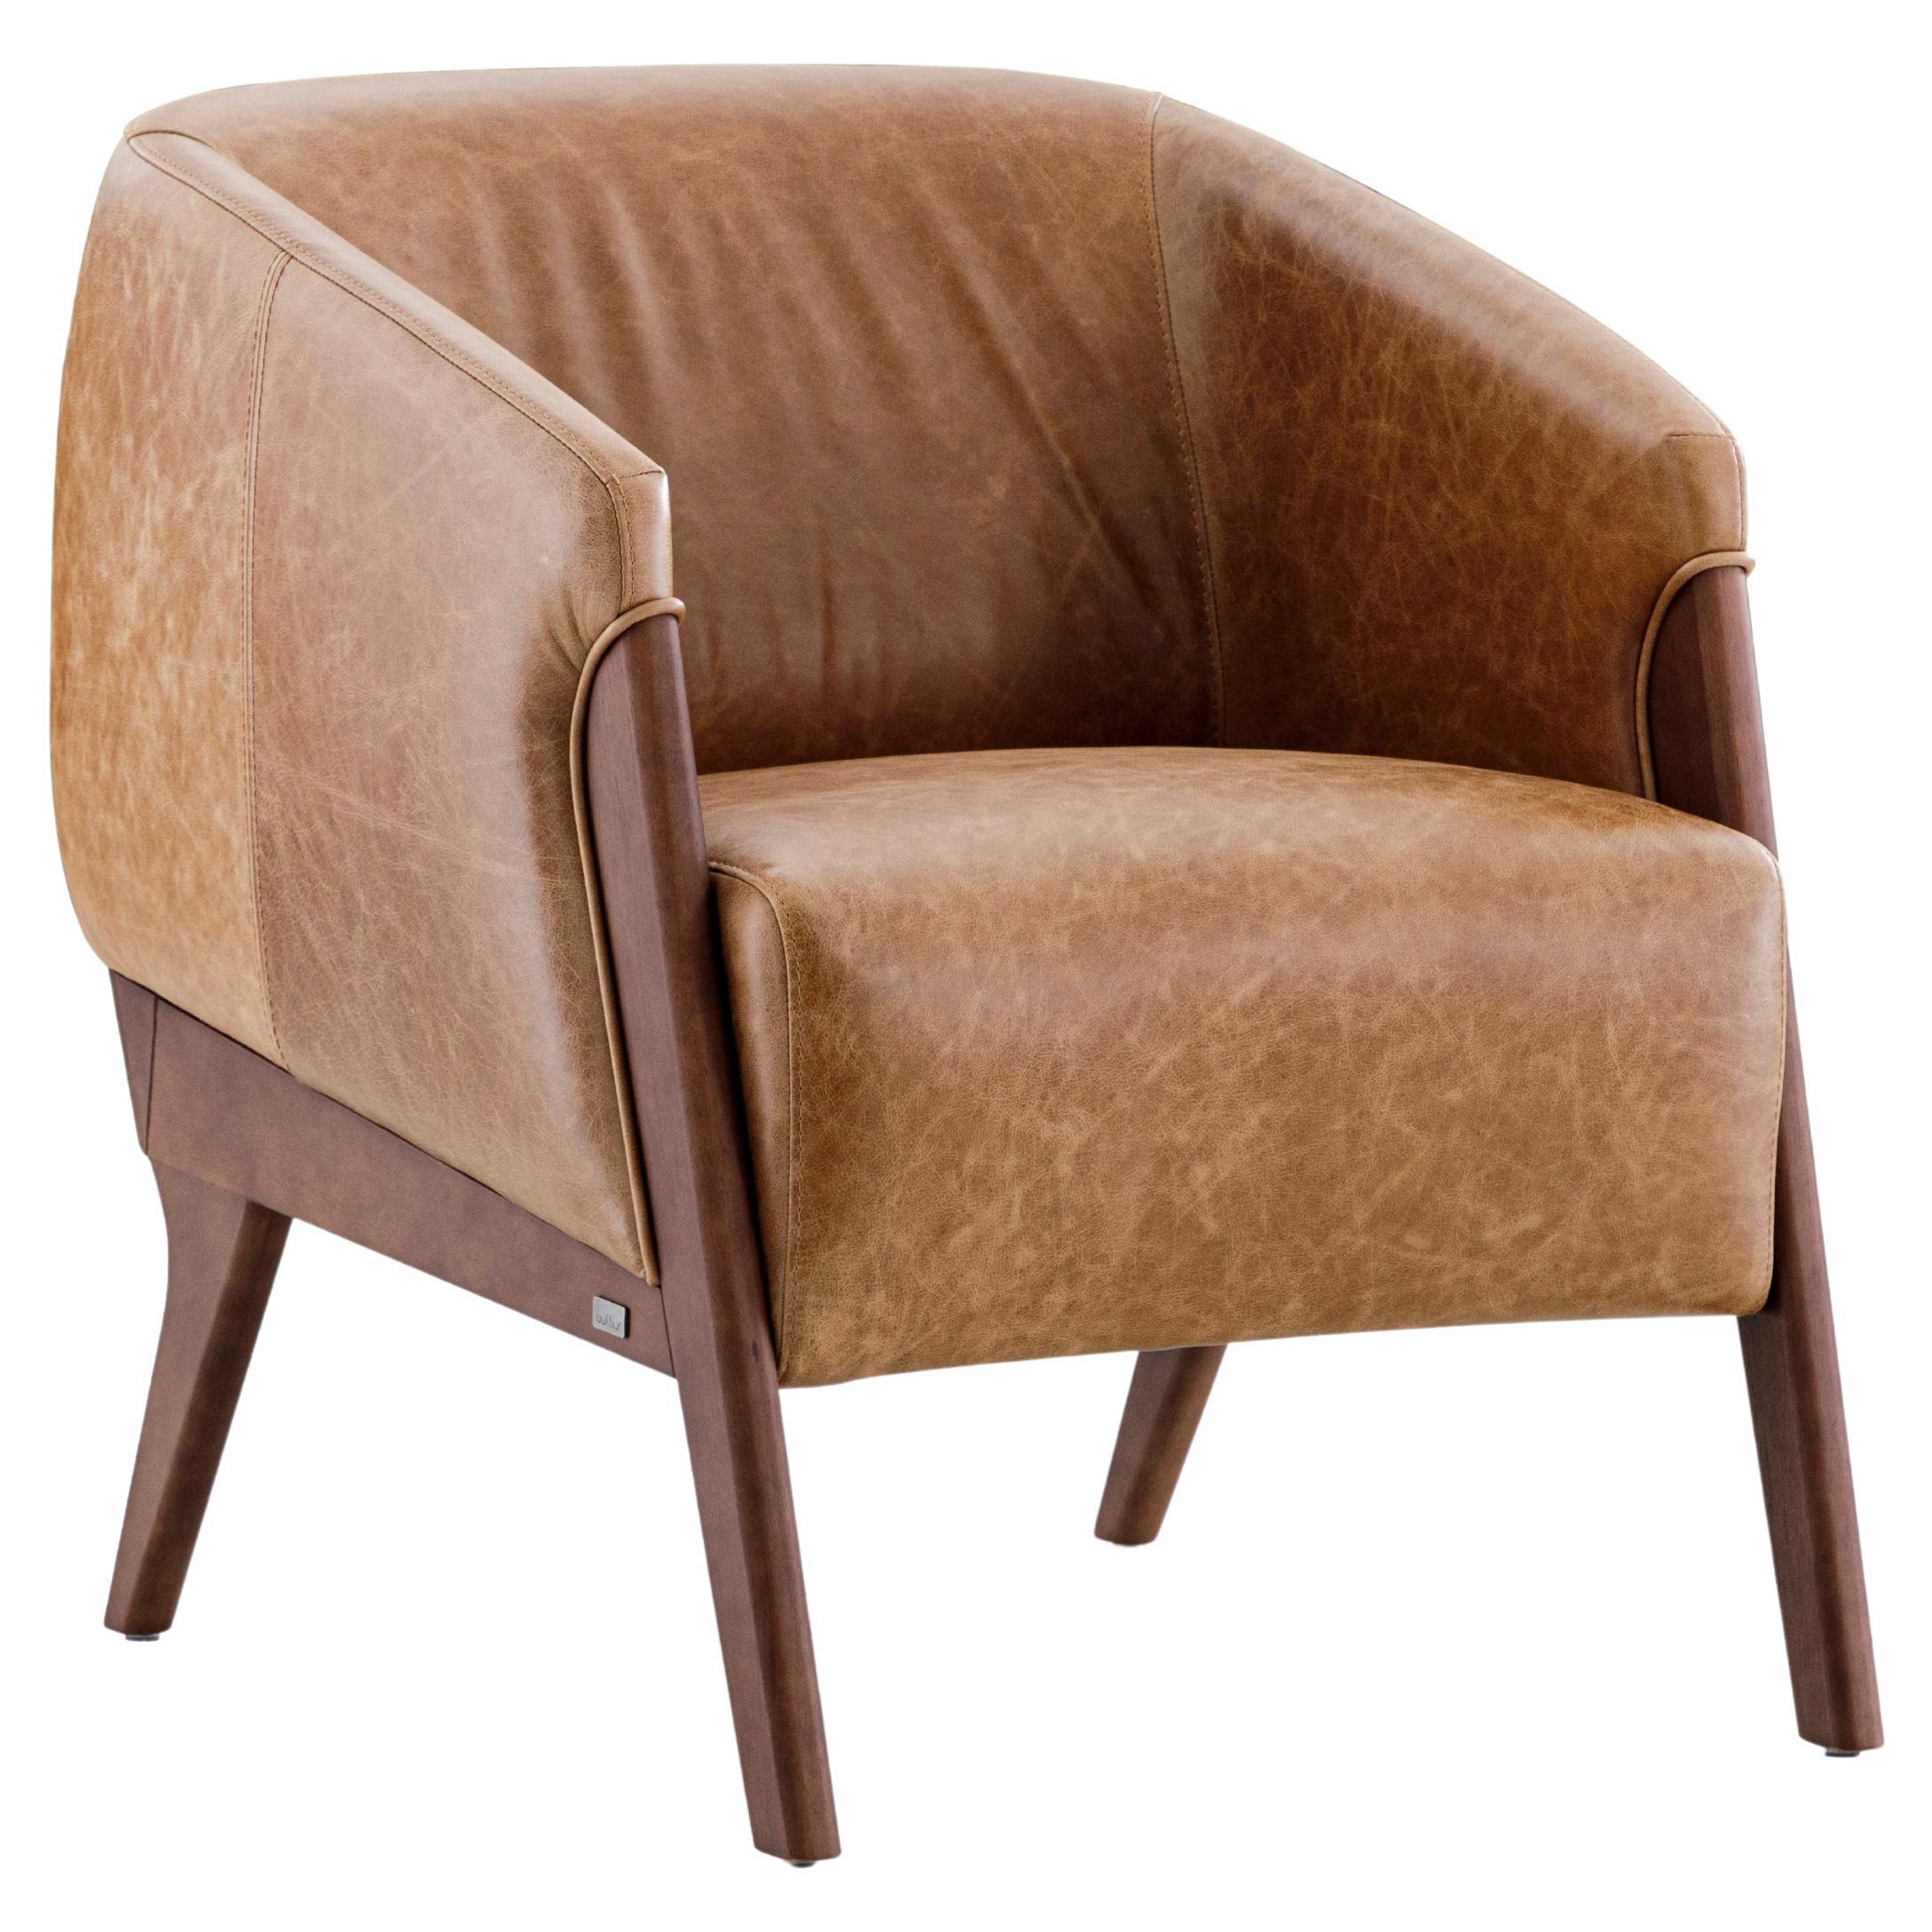 Abra Armchair in Brown Leather and Walnut Wood Finish For Sale